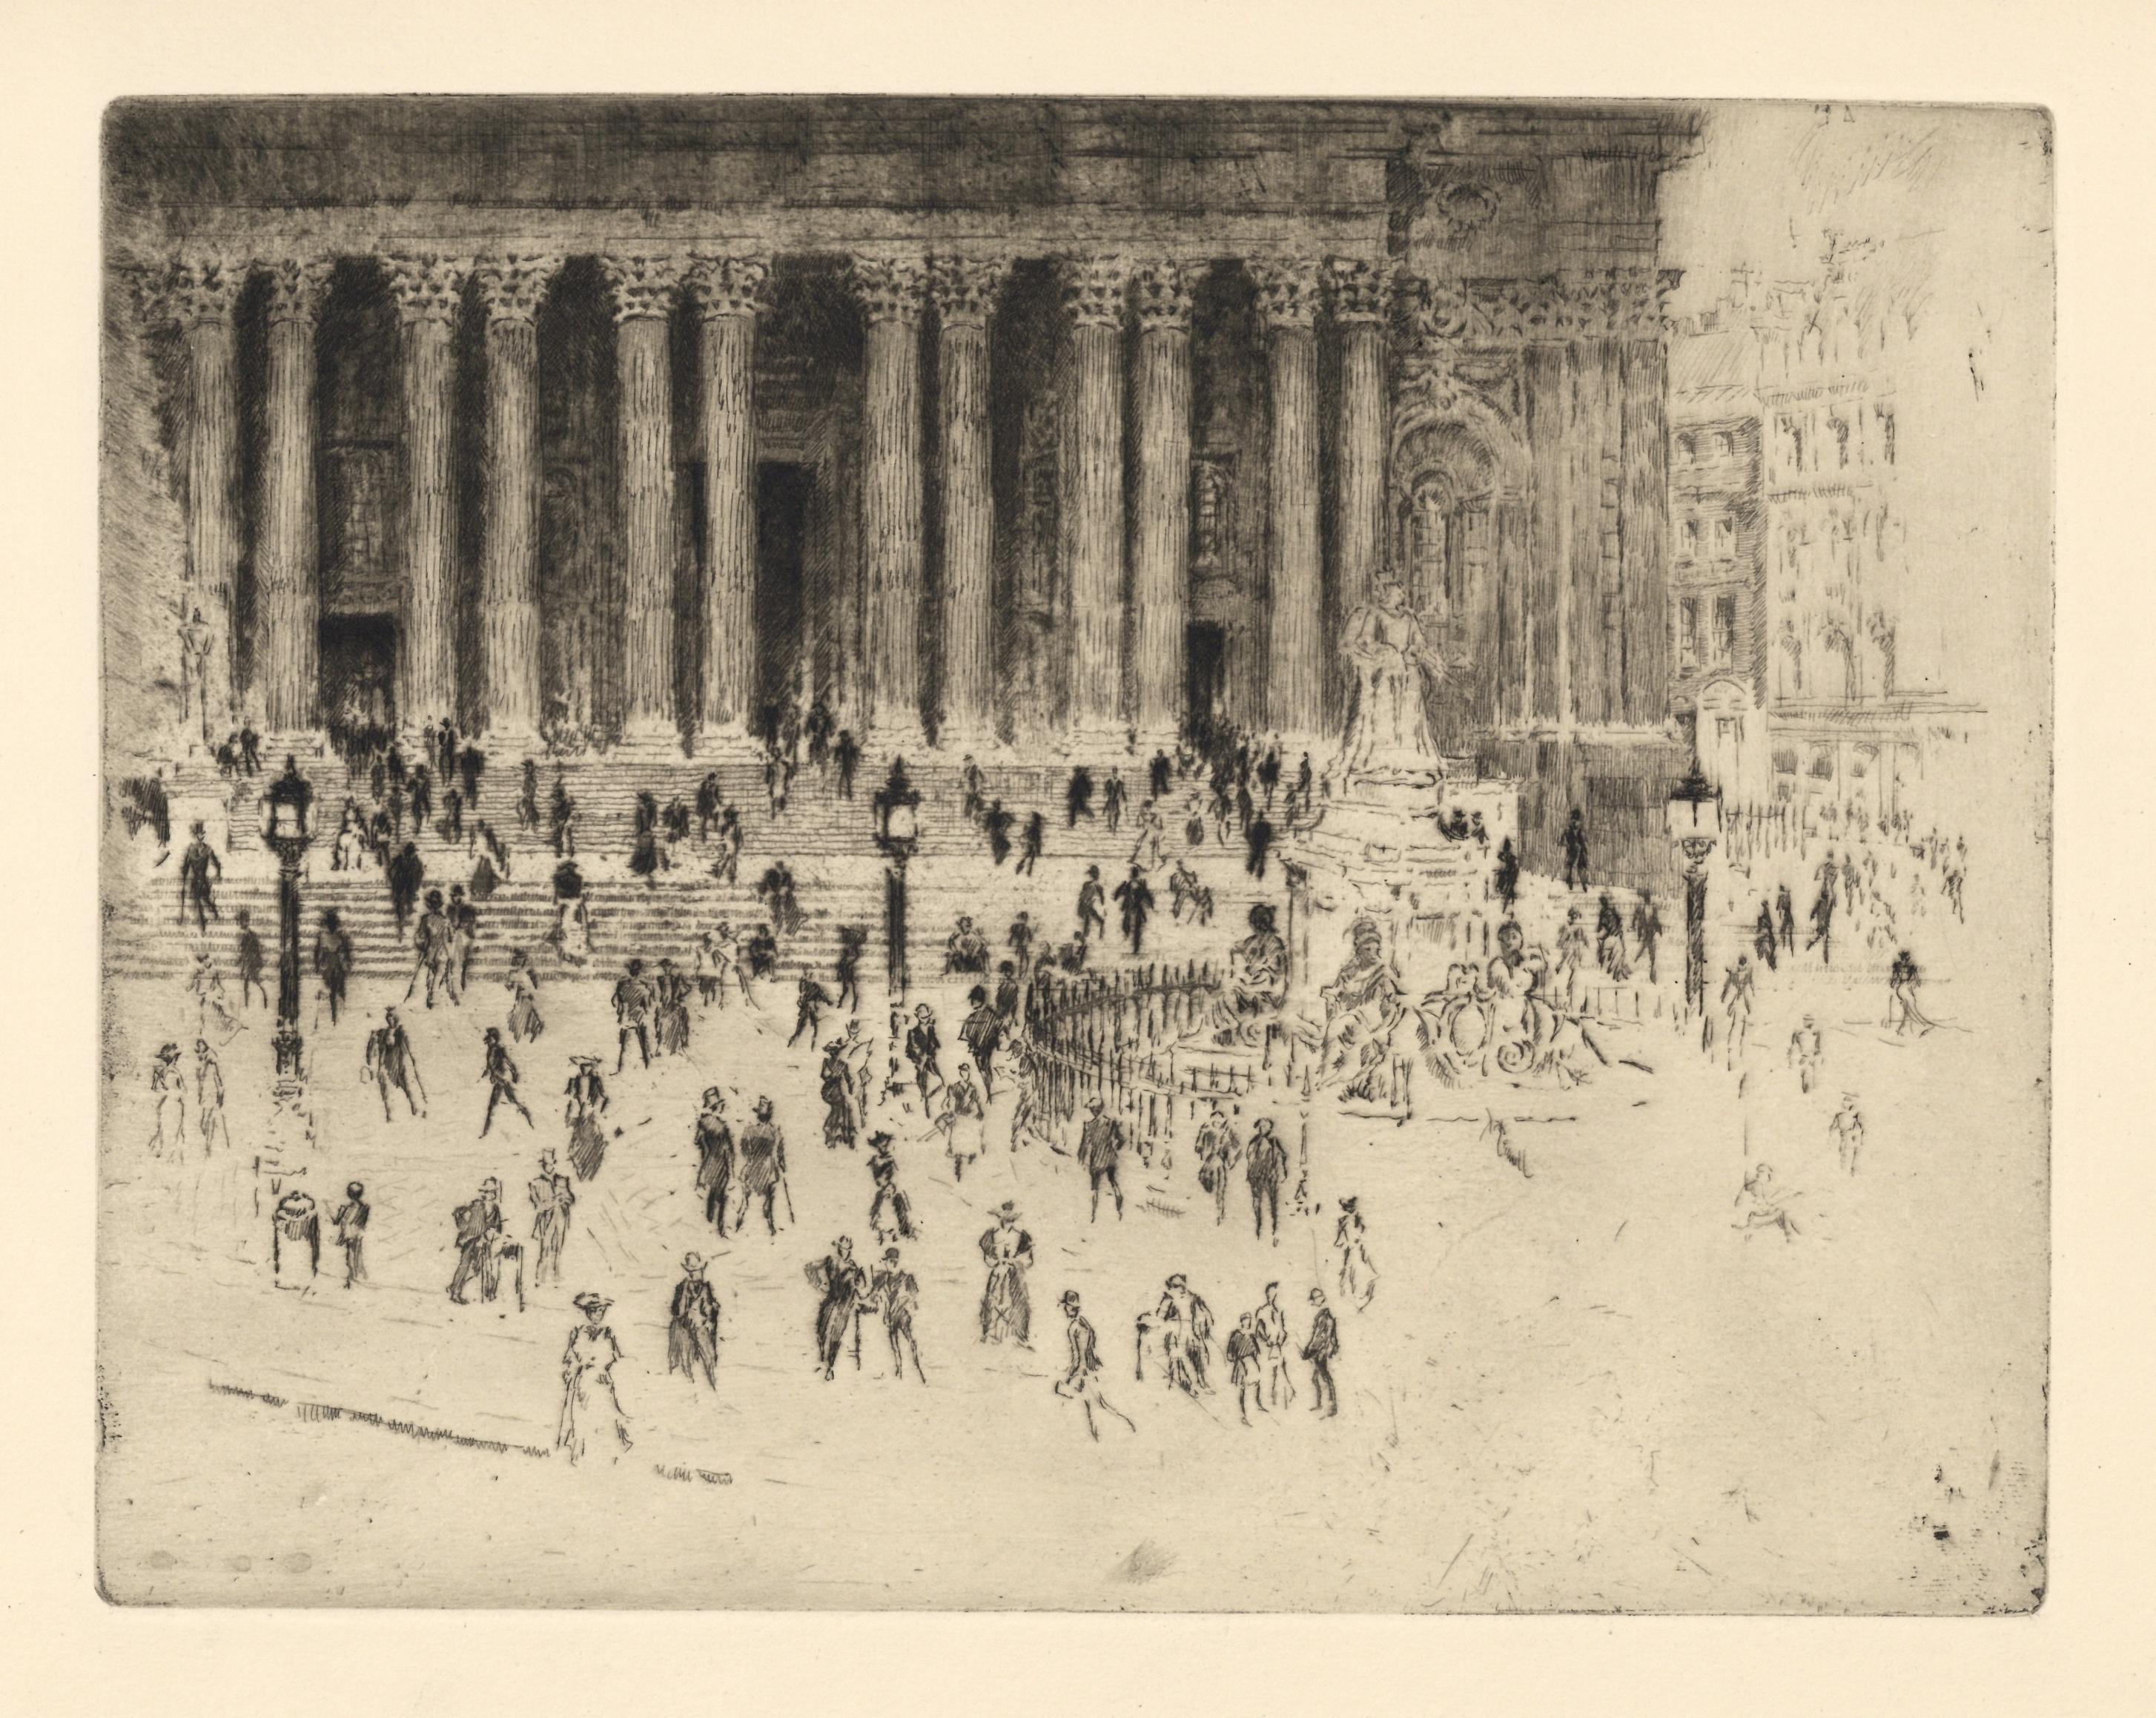 "The Pavement, St. Paul's" original etching - Print by Joseph Pennell